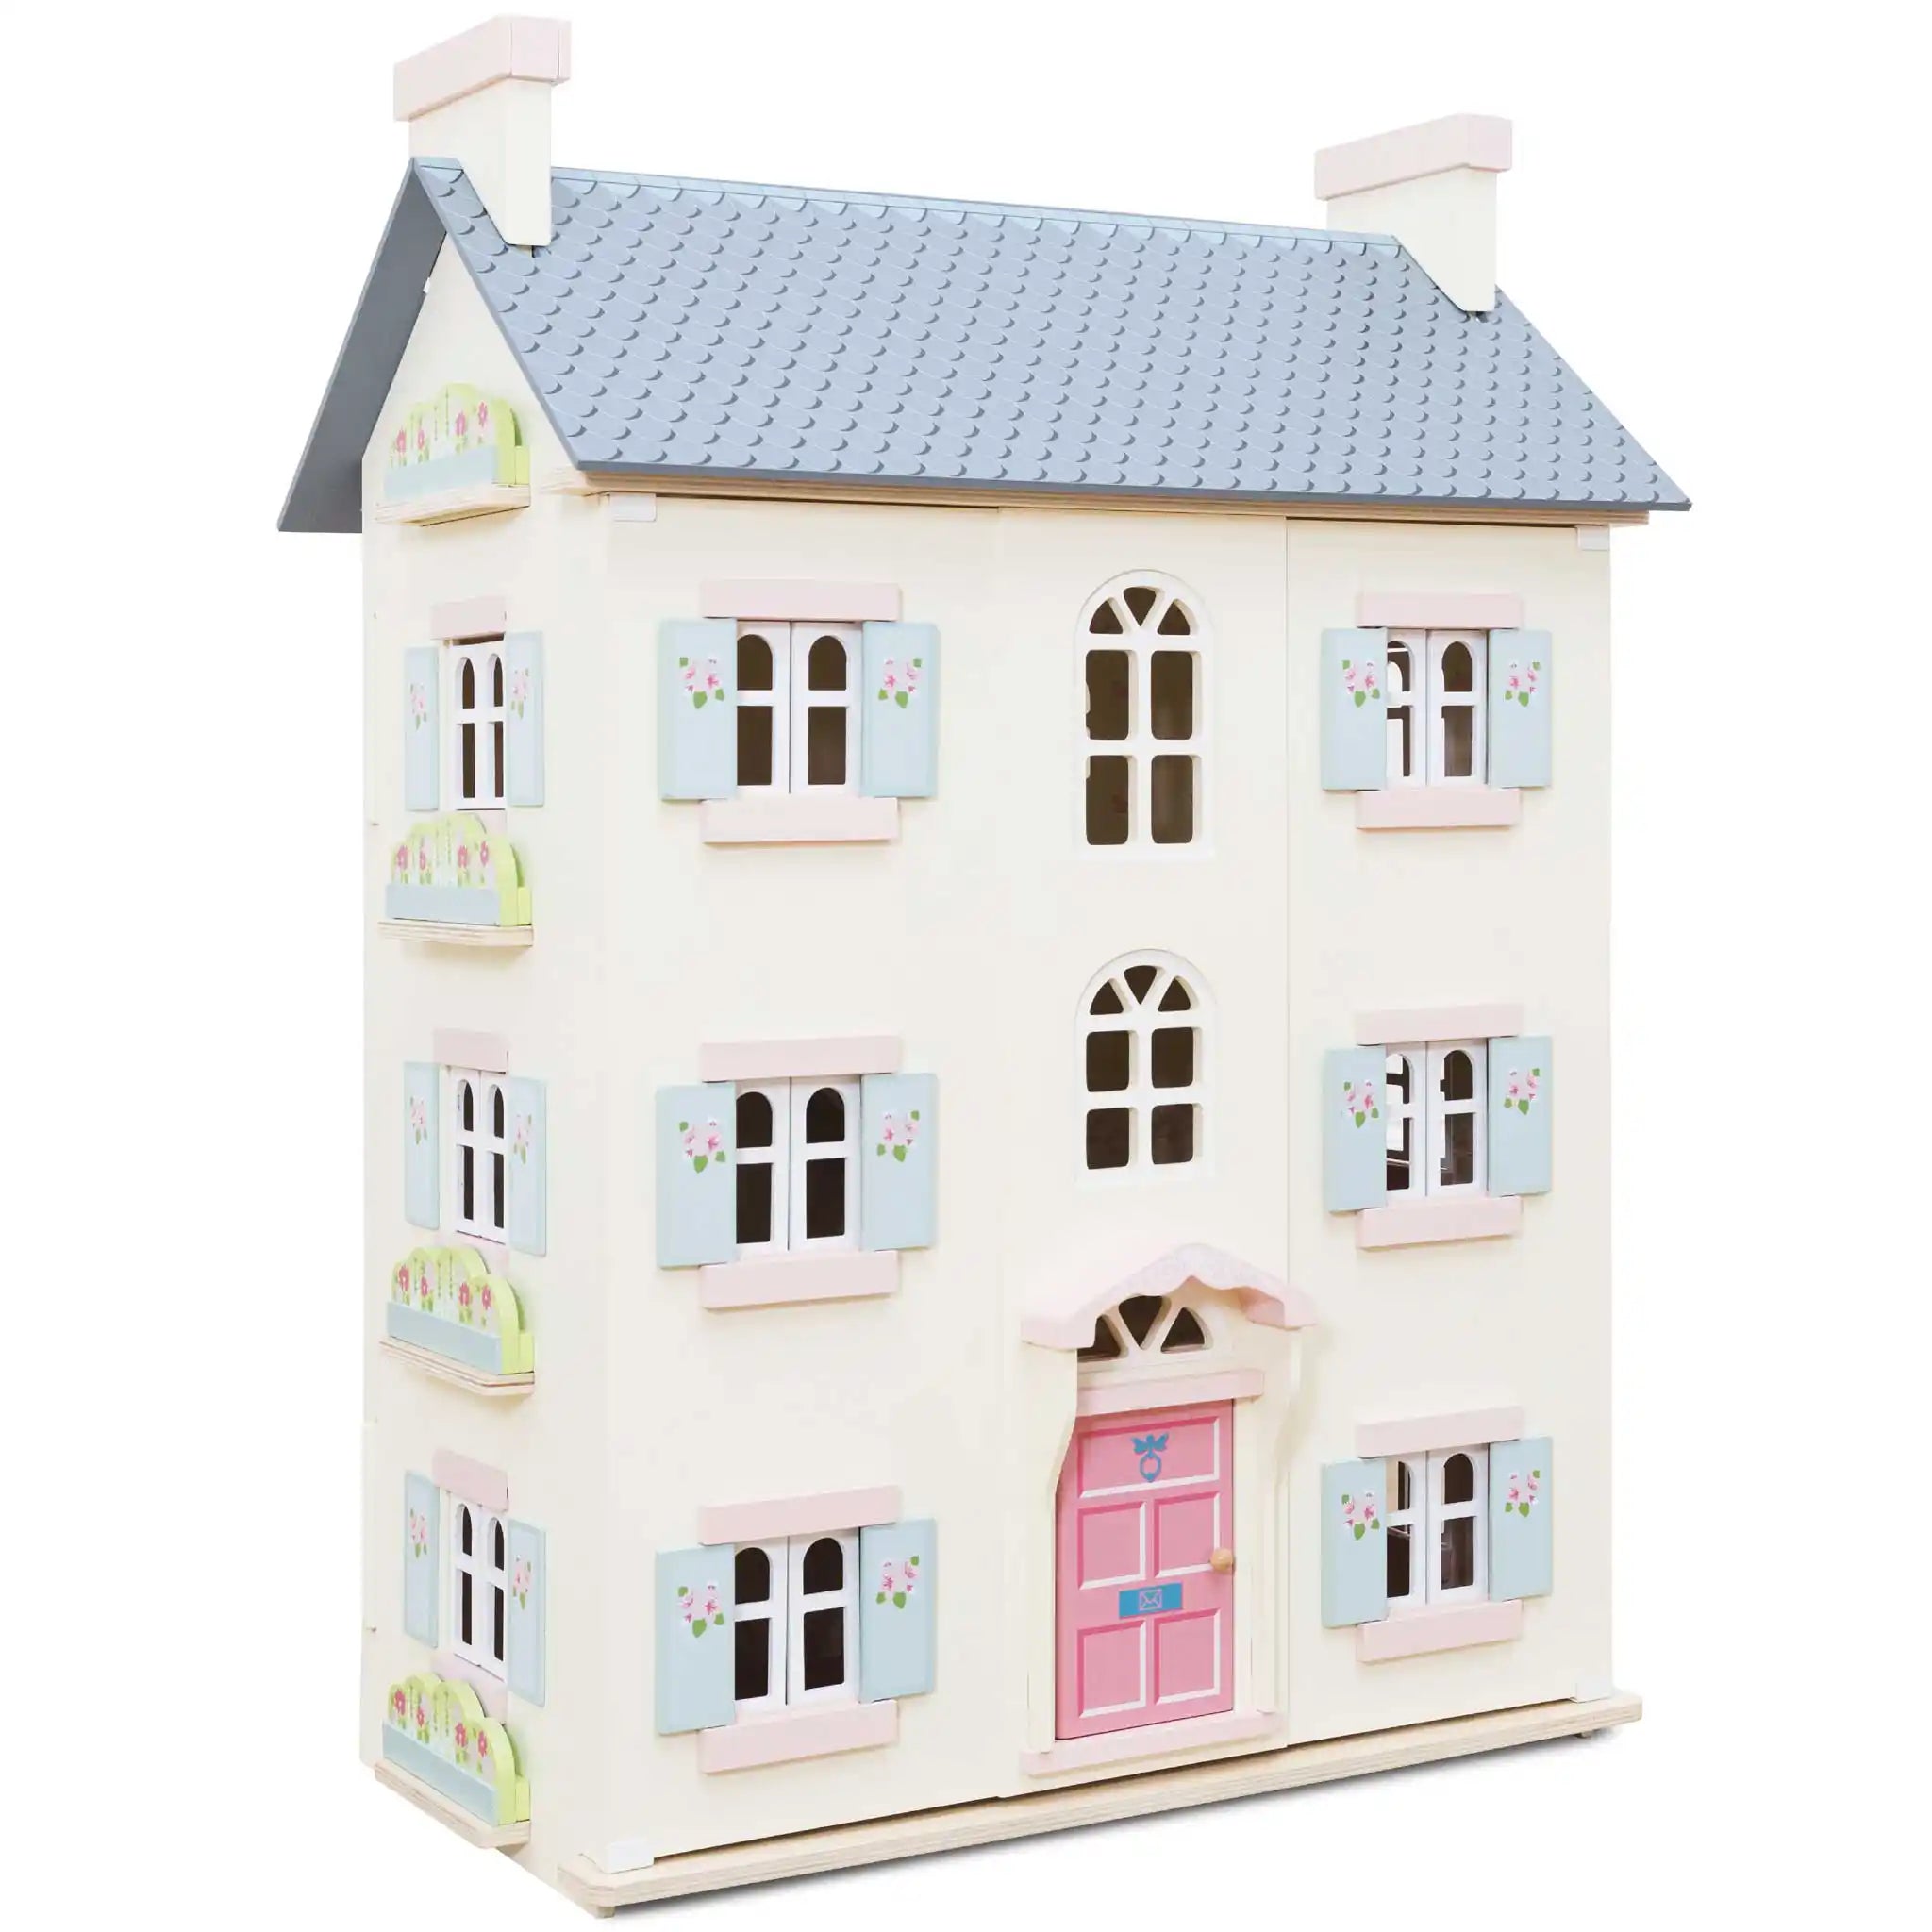 Thimbleberry Cottage - Classic Wooden Dollhouse